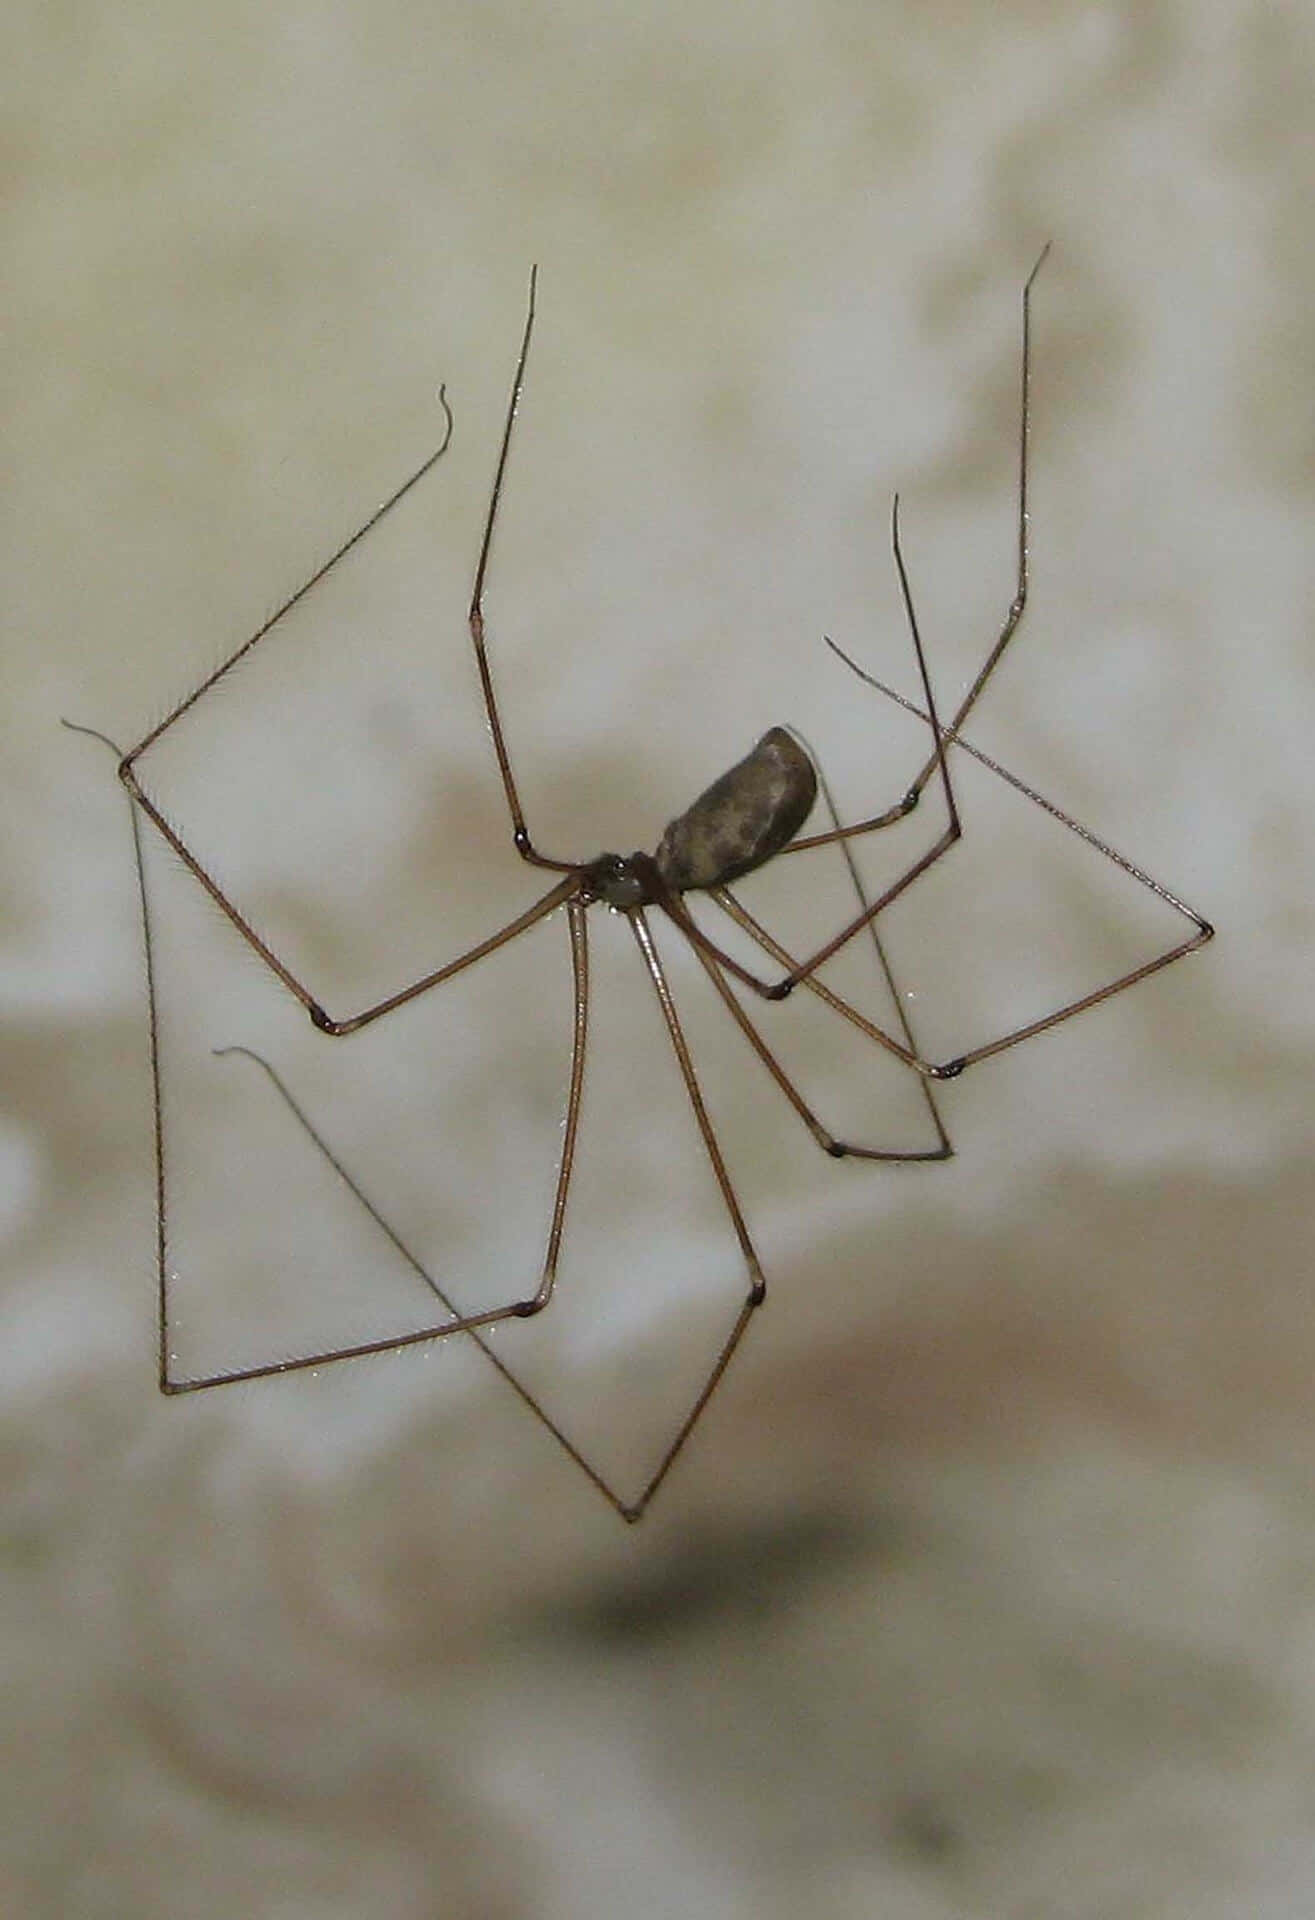 Close-up view of a Brown Recluse Spider Wallpaper